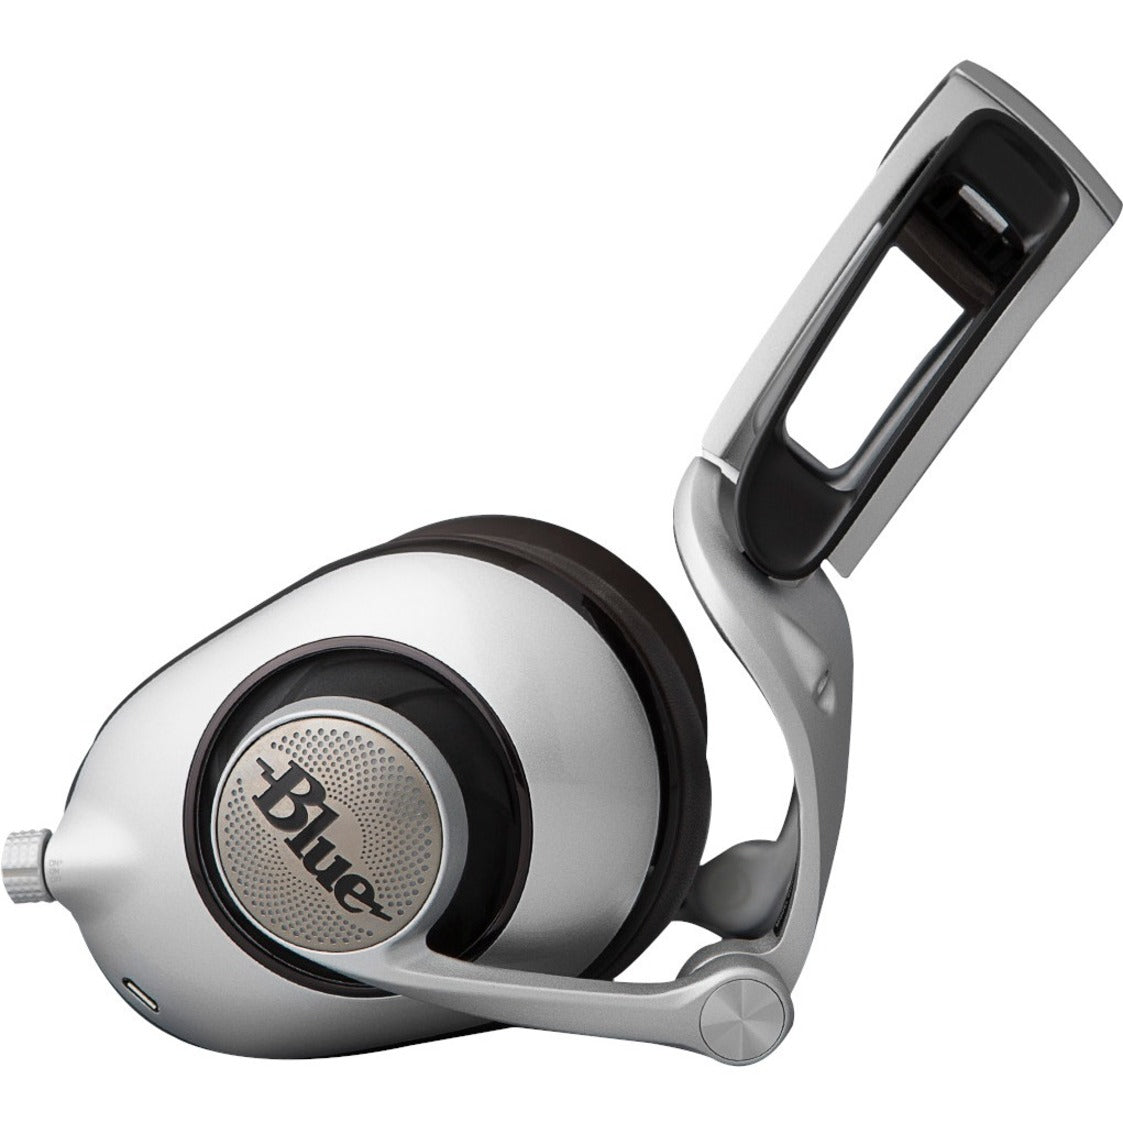 Blue 982-000133 Ella Planar Magnetic Headphone With Built-In Audiophile Amp, Immersive Sound Experience